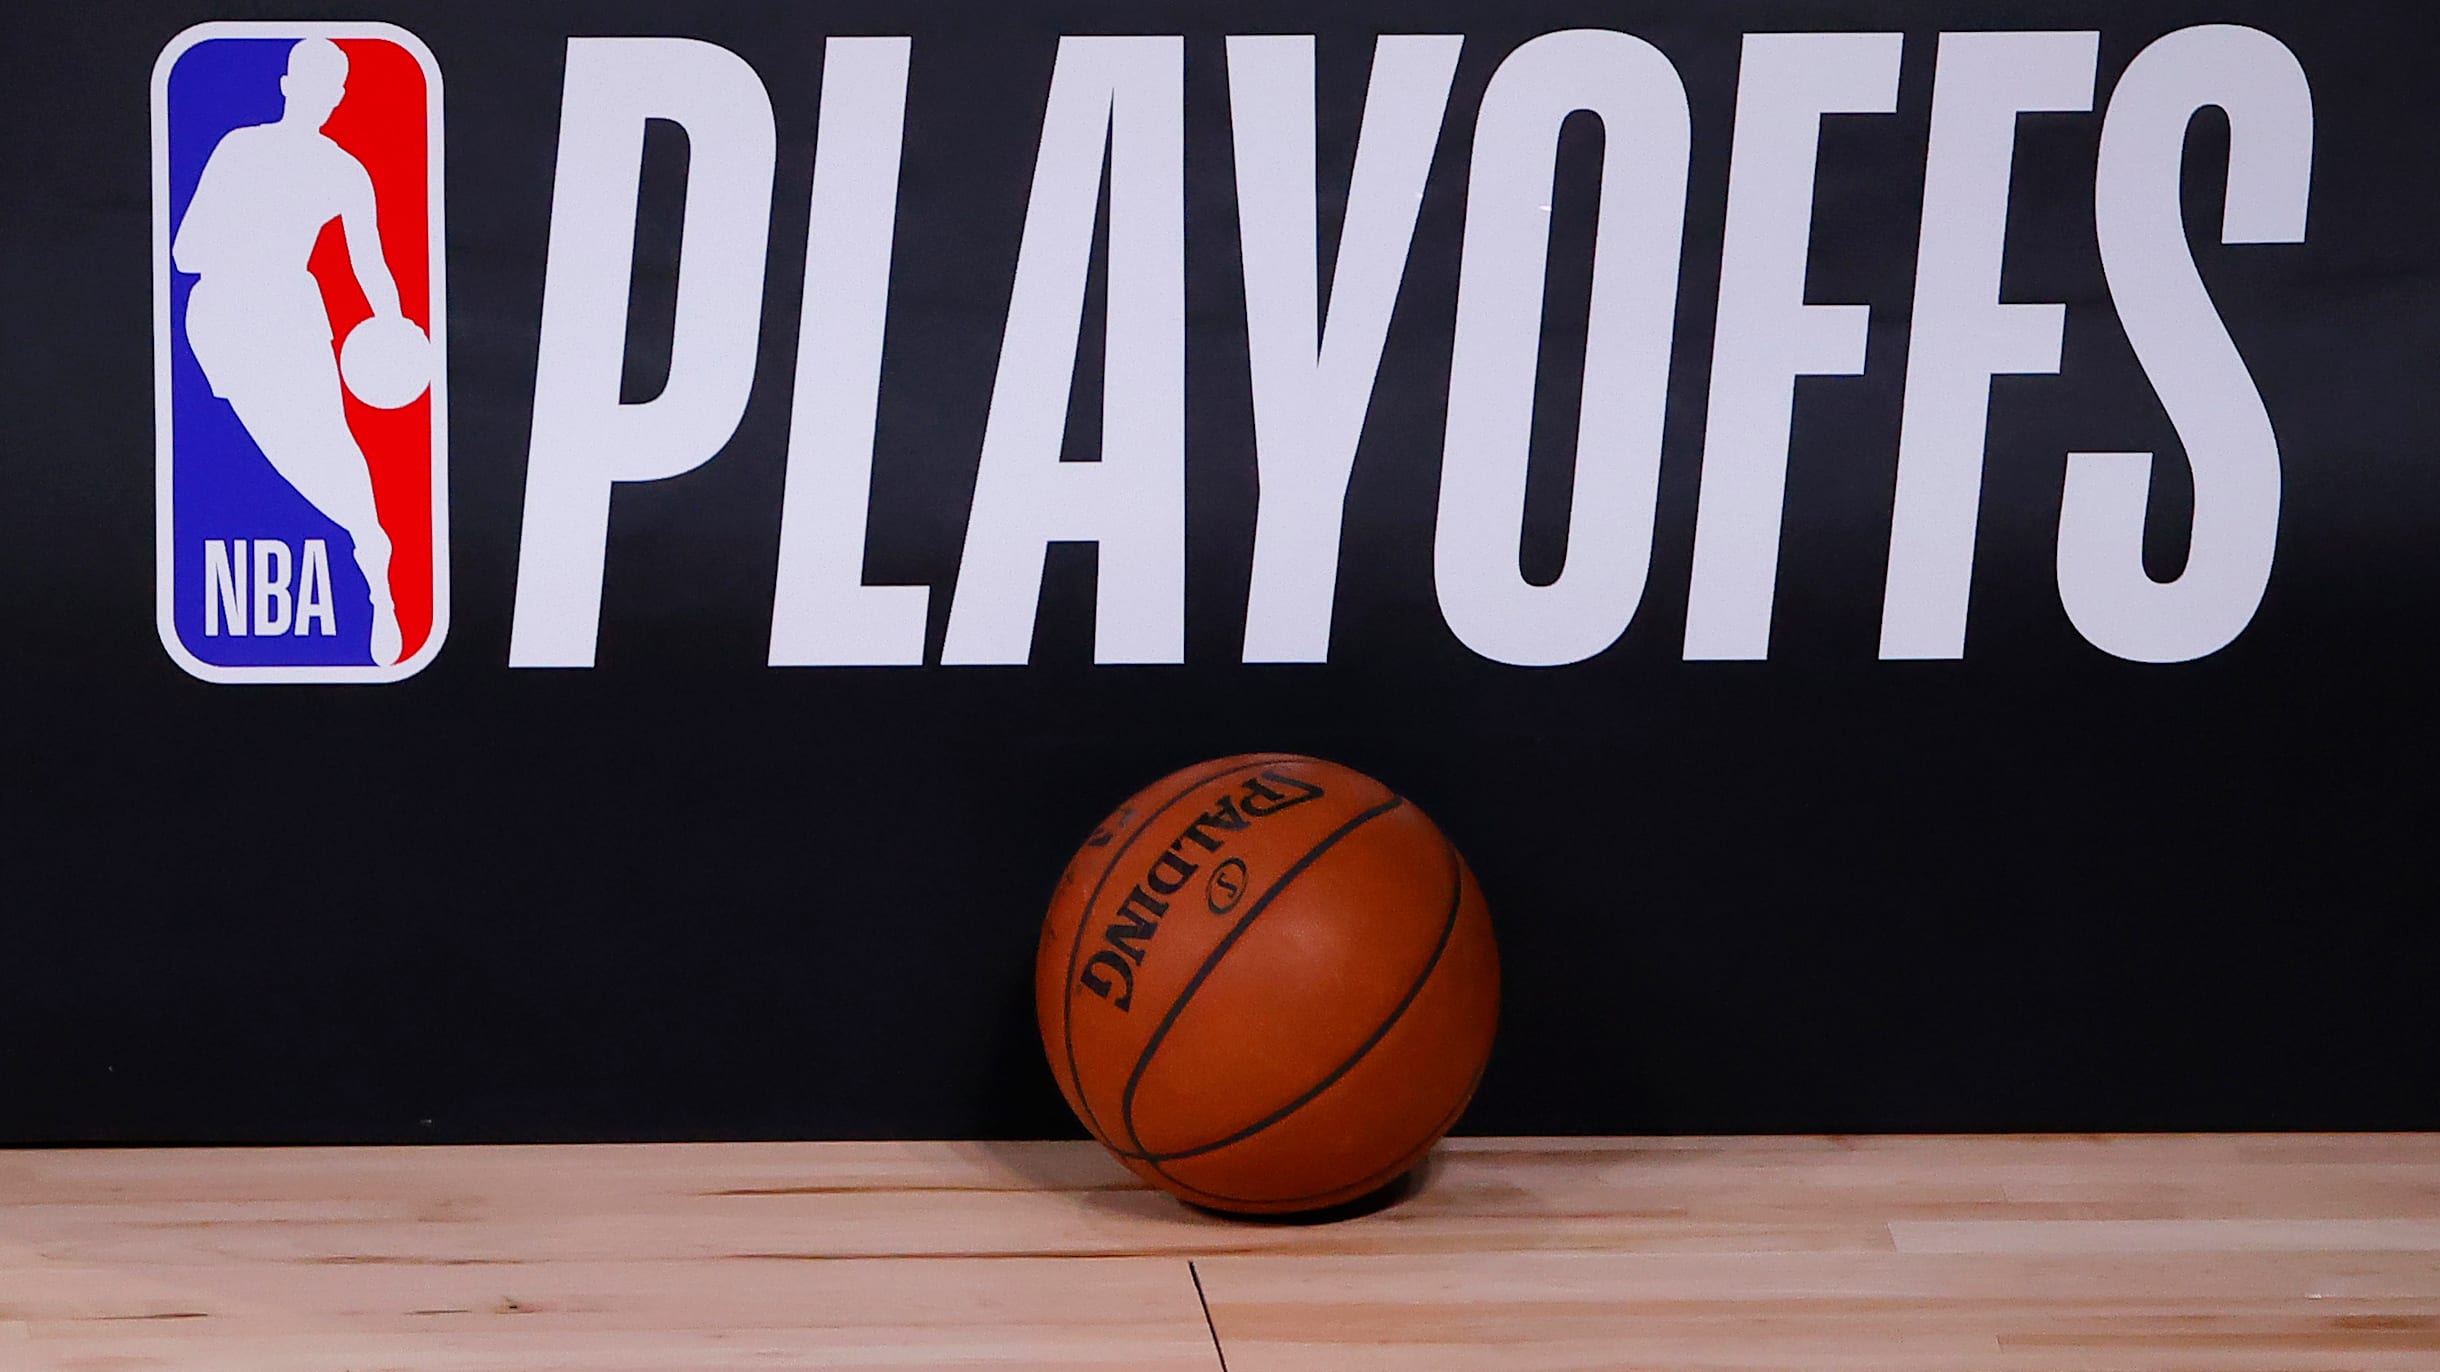 NBA Playoffs 2021 Schedule, players to watch, top teams, and more